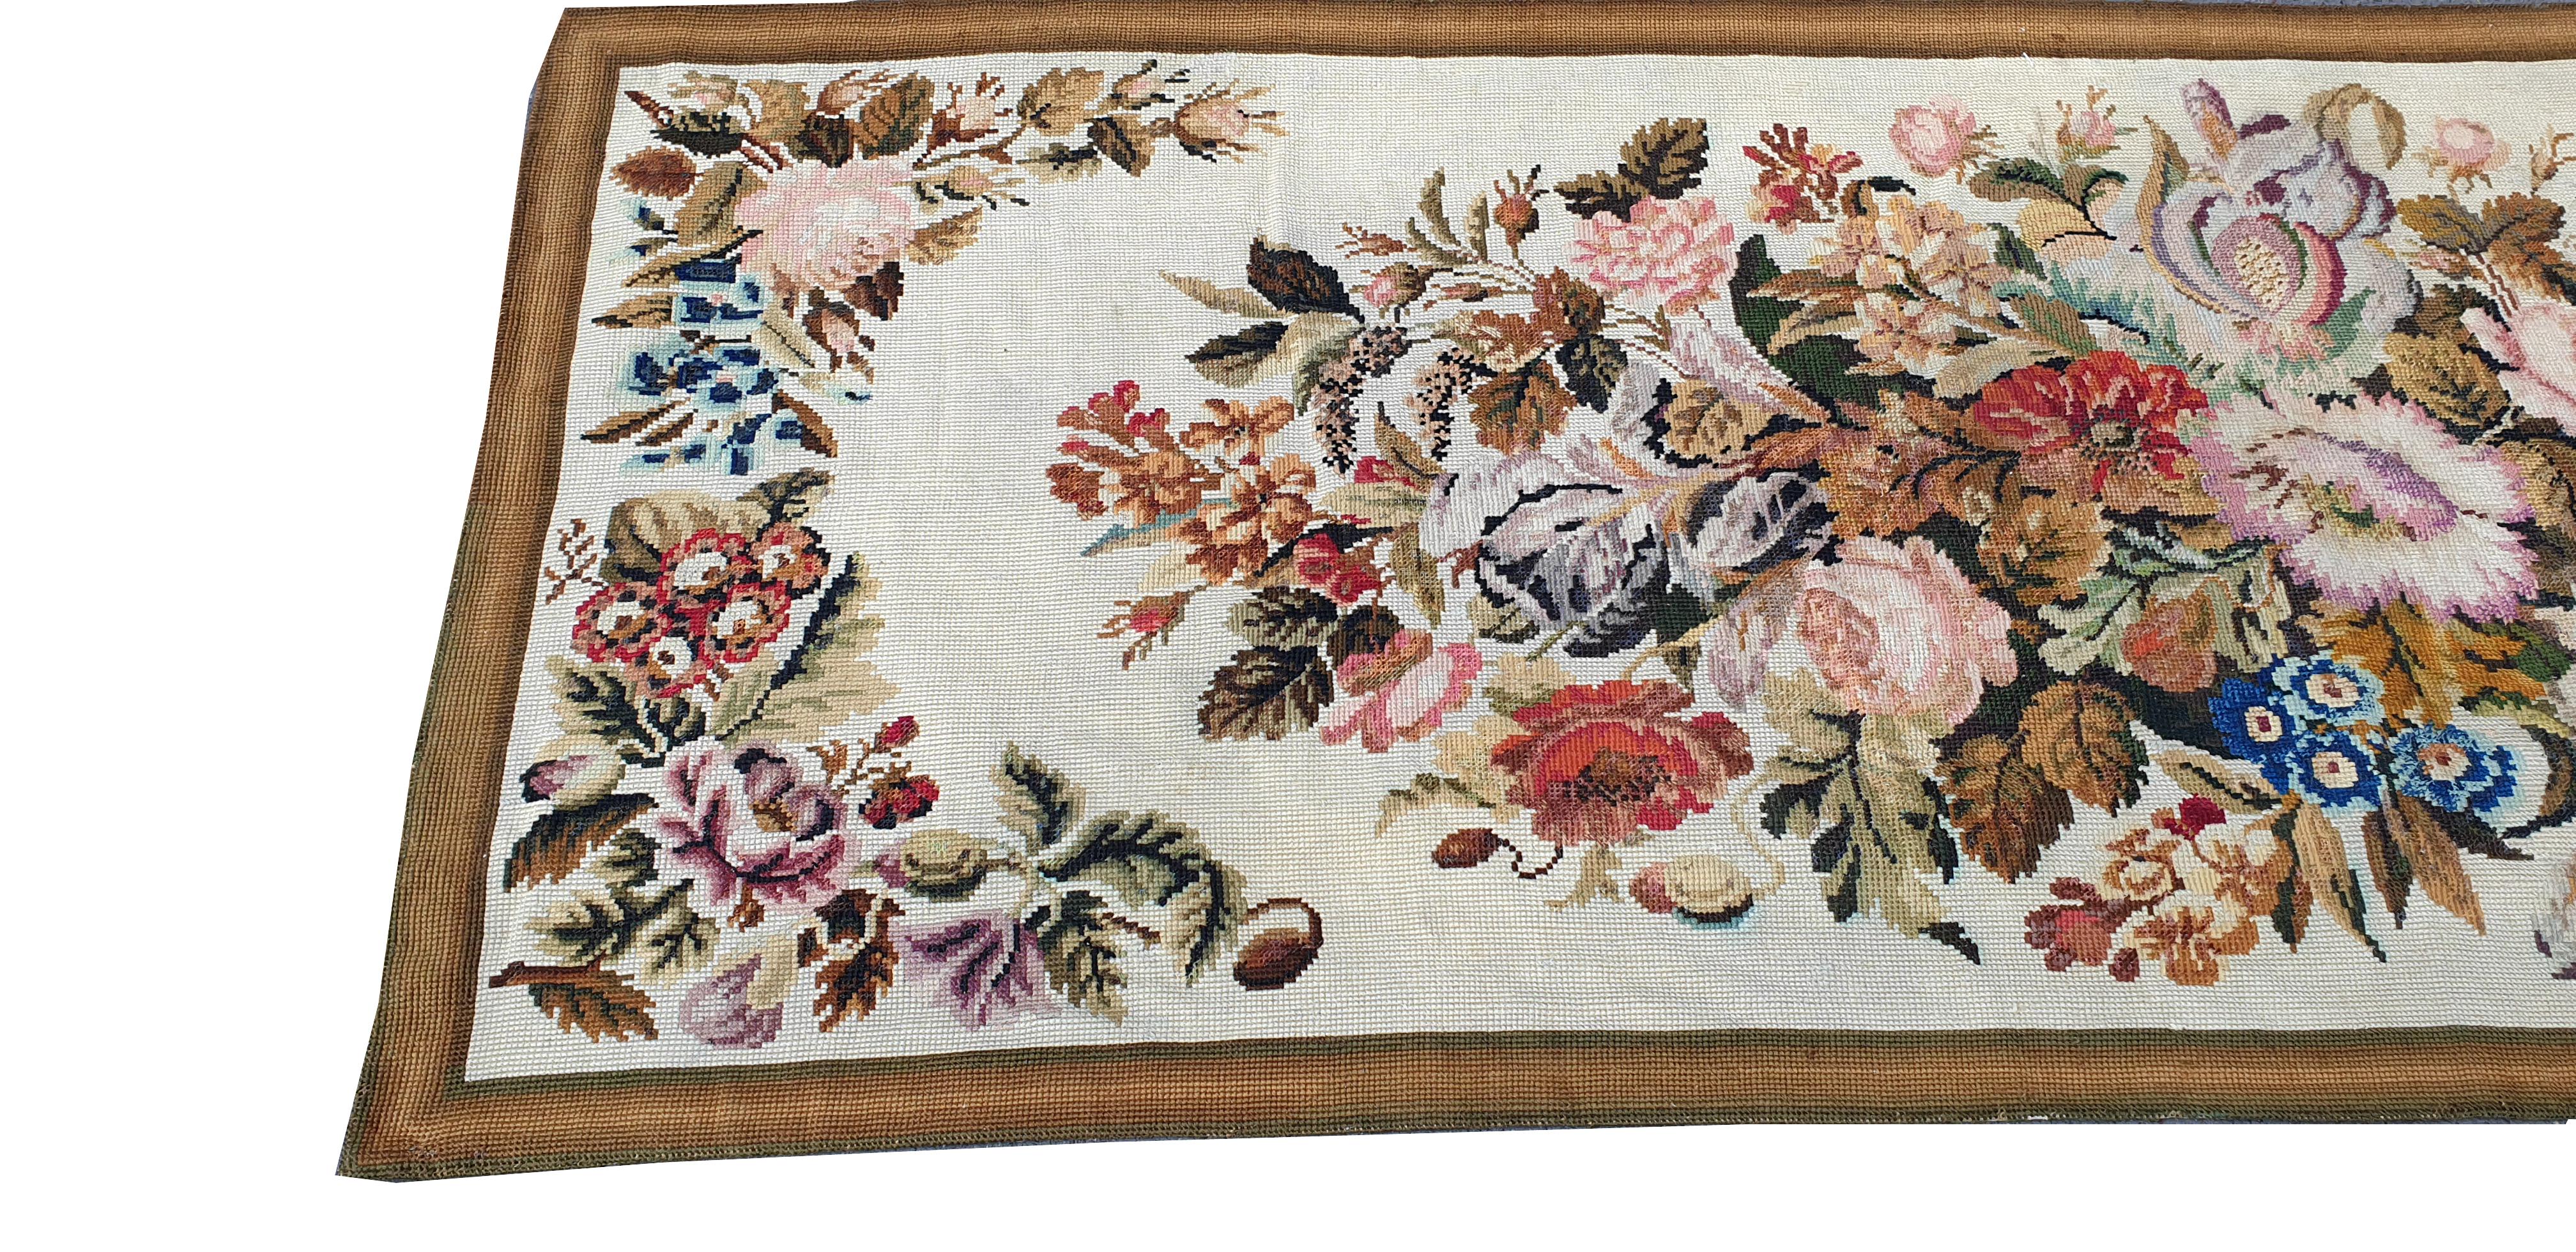 883 - 19th century Au Petit Point rug
 in very good condition, lined with fabric and very pretty colors.
Measures: 3m10 x 1m10.